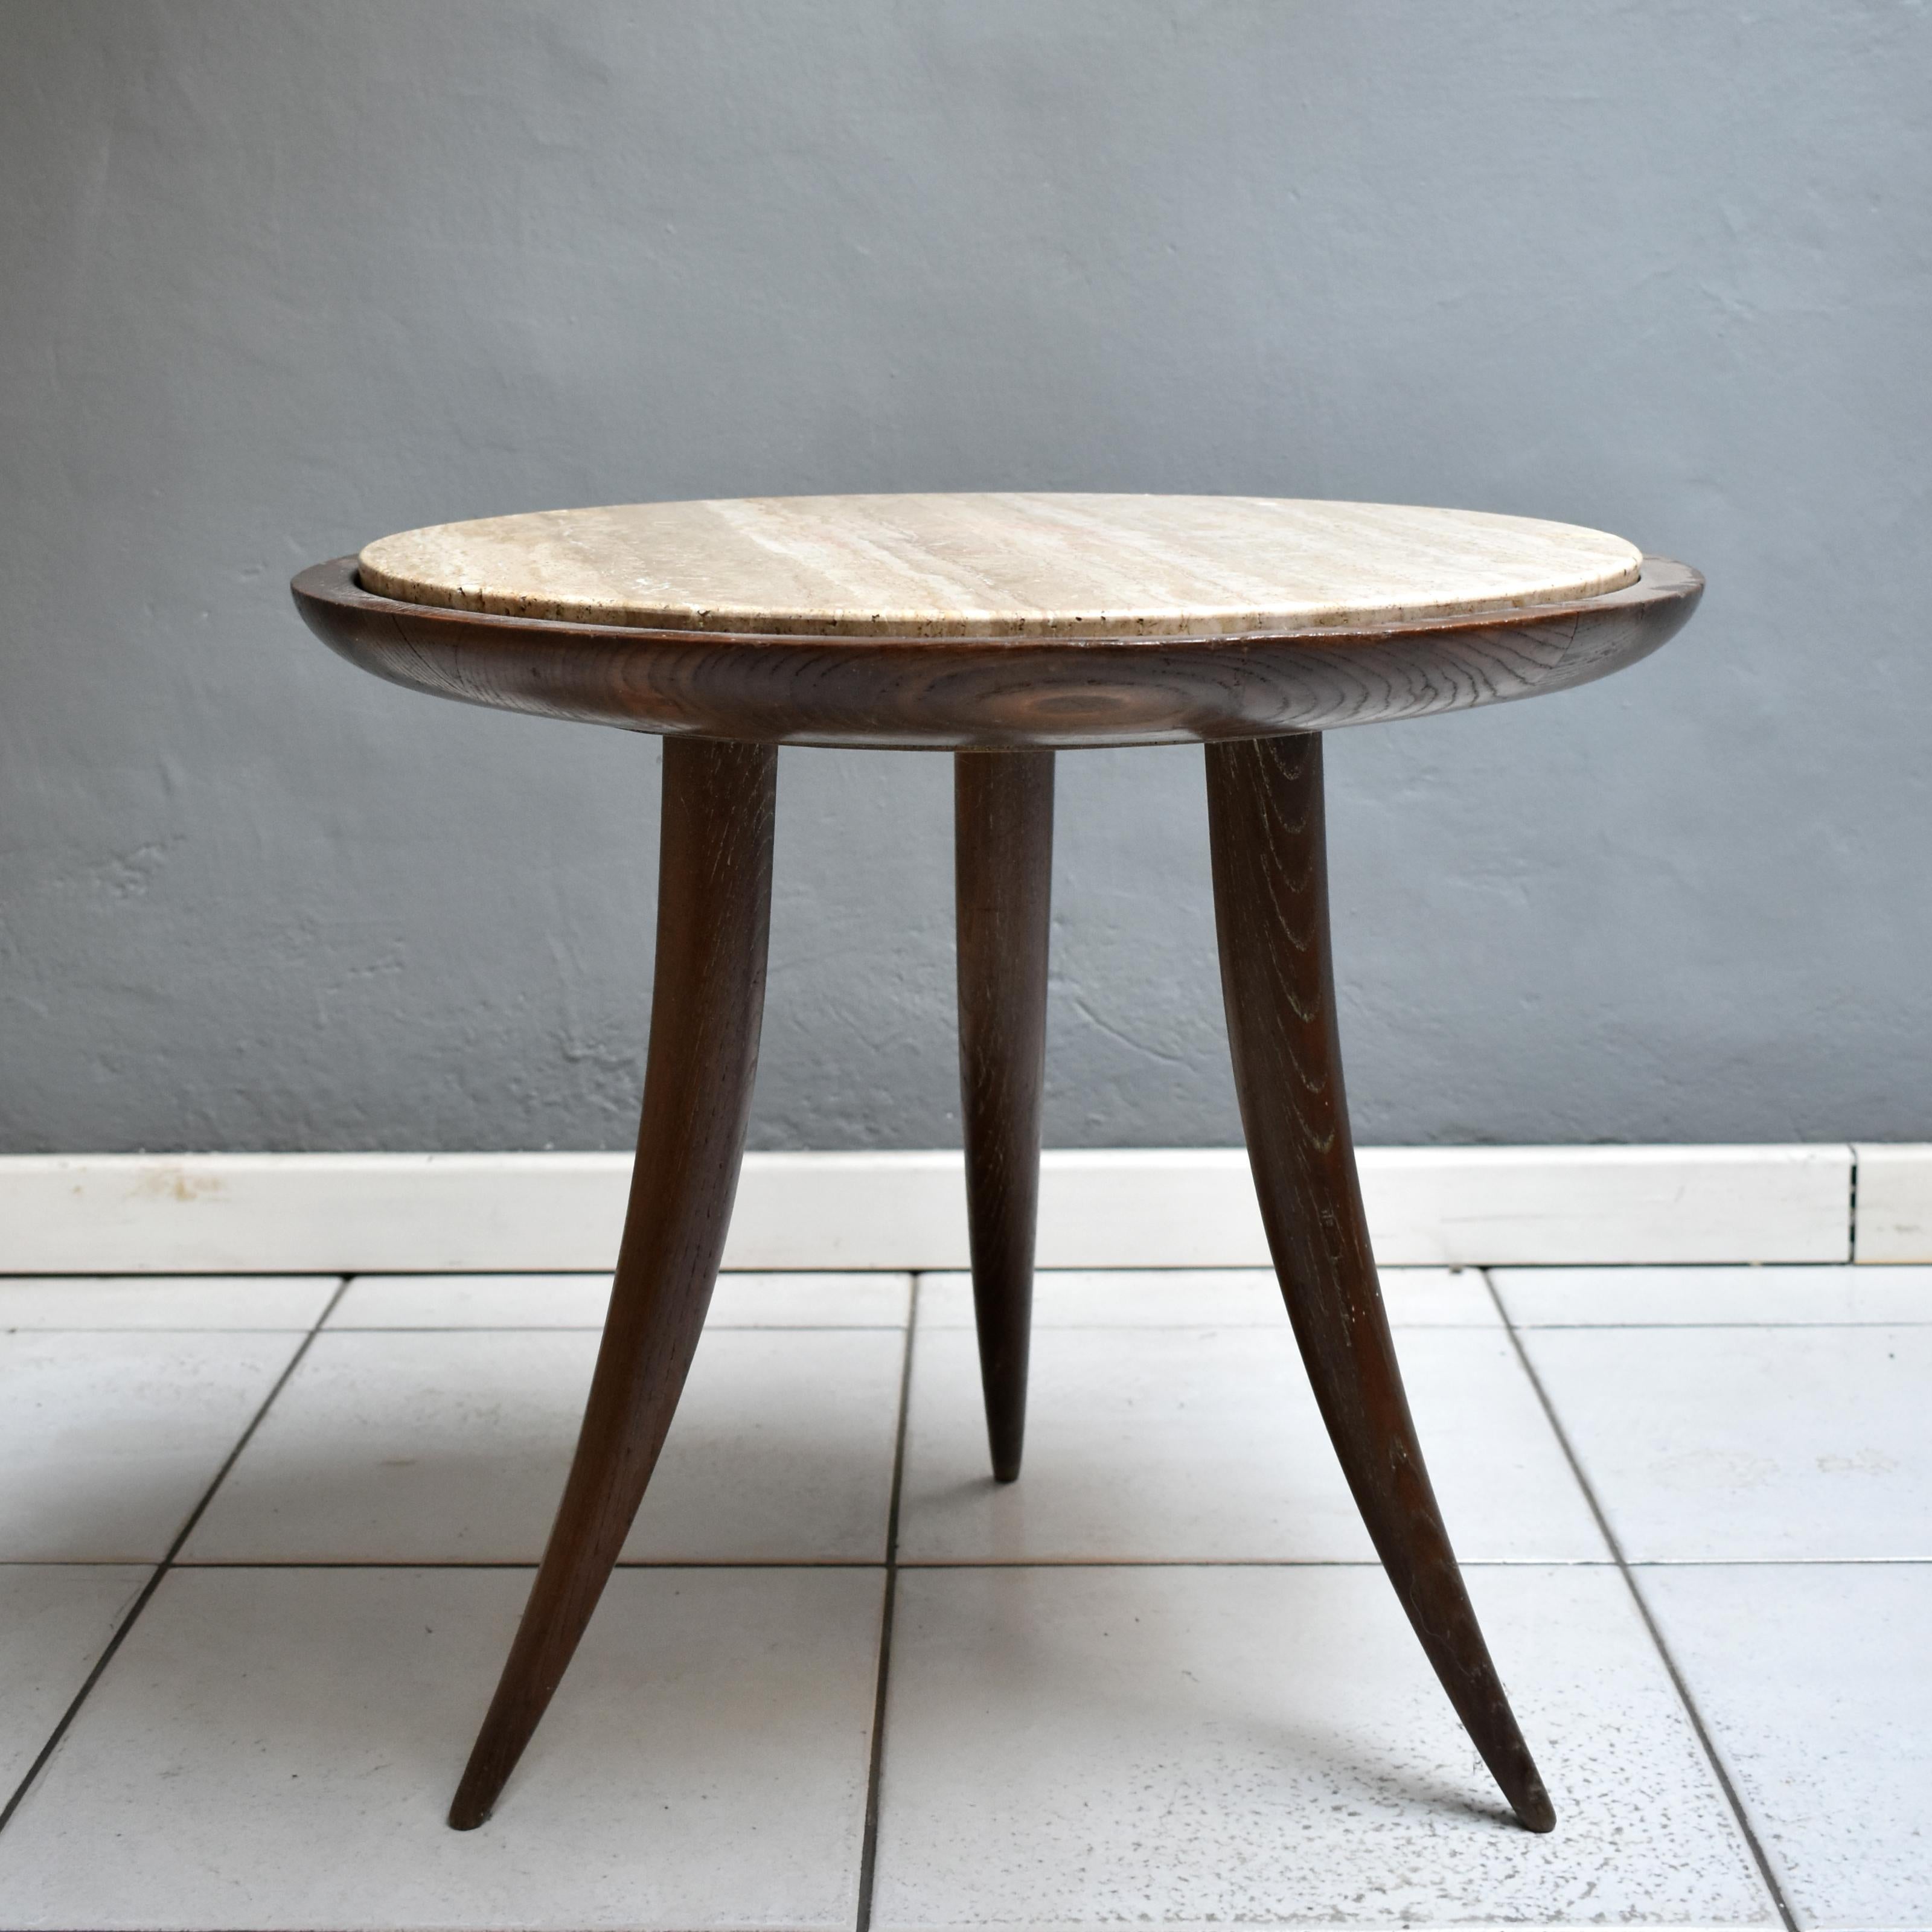 Round vintage coffee table in wood and travertine marble.
Coffee table or coffee table from the 1950s, Italian manufacture.
The coffee table features a 3-legged wooden frame with a marble top.